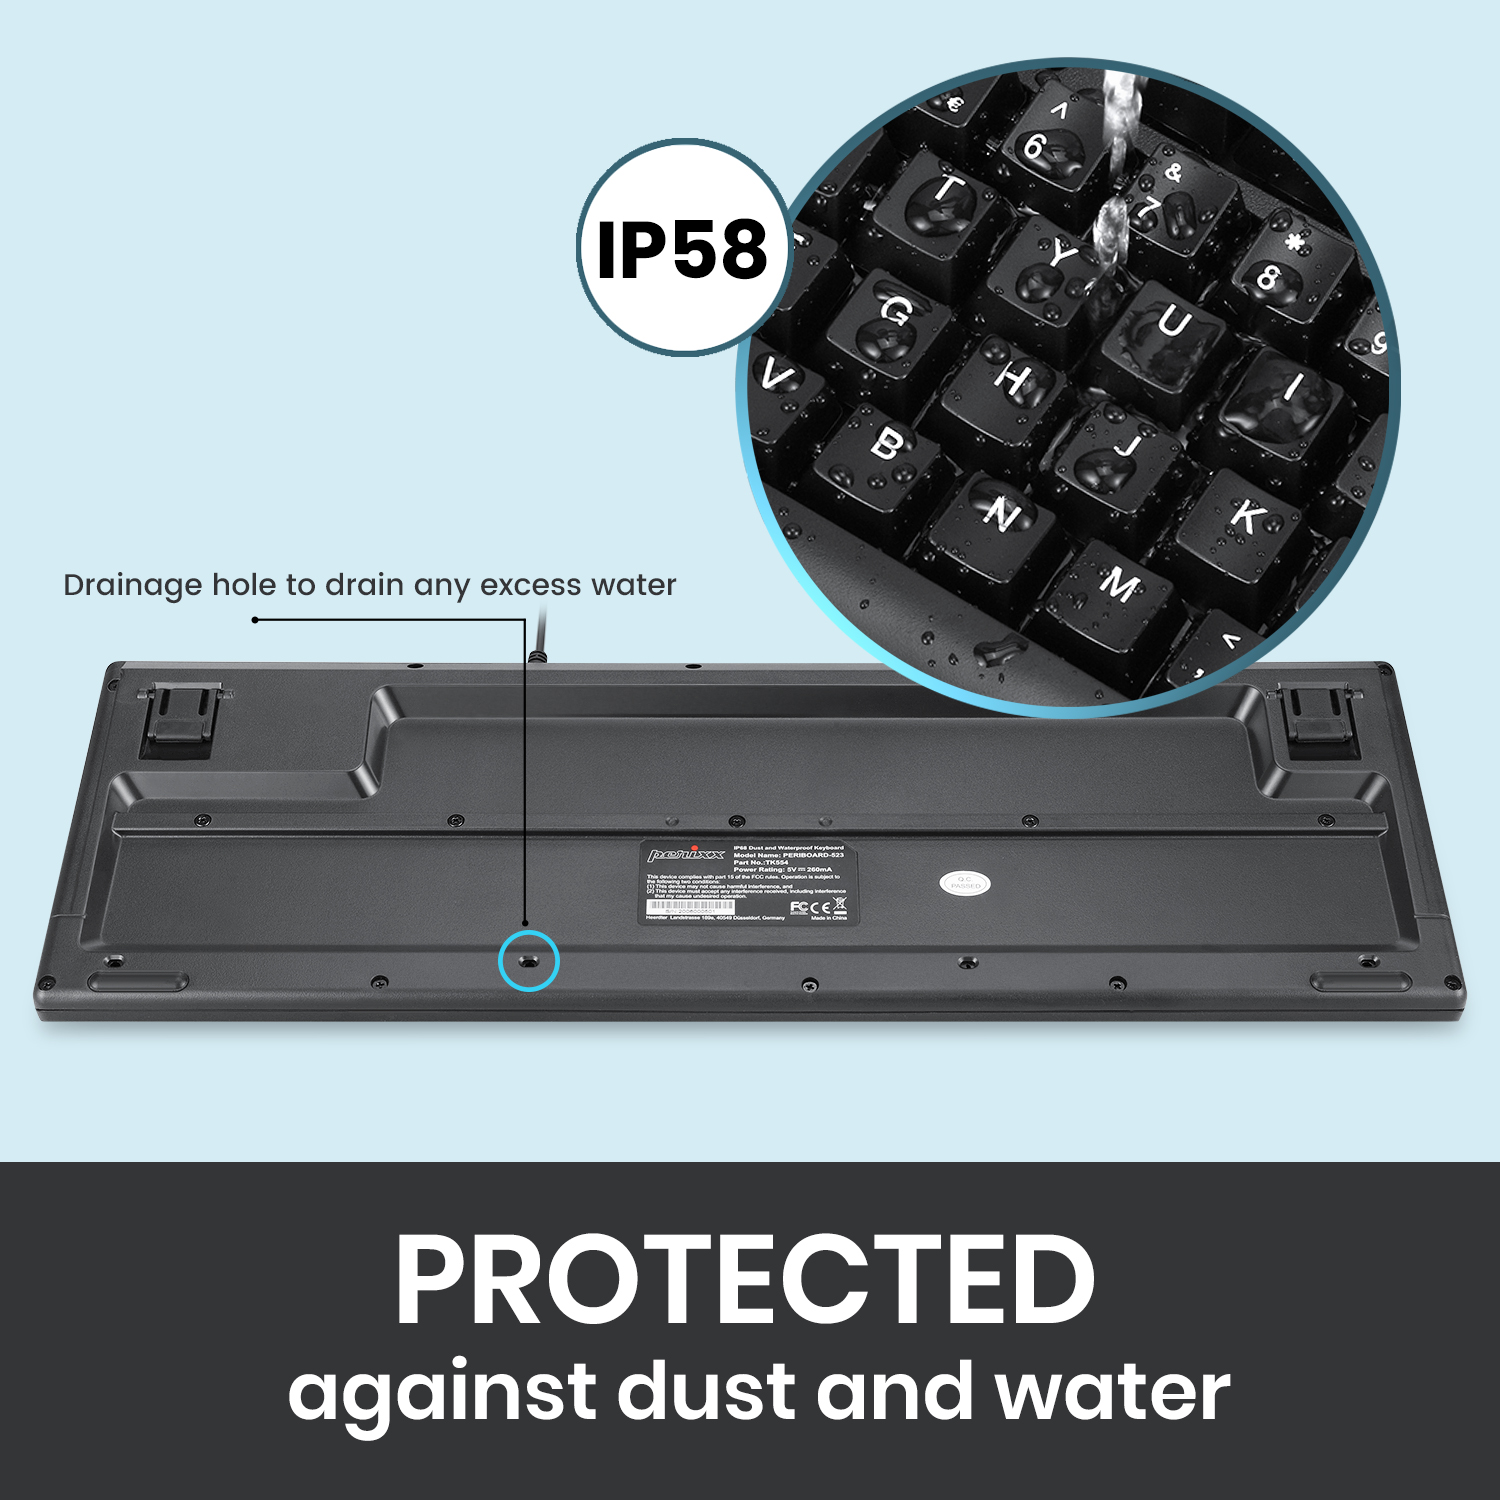  IP58 Certified Against Water and Dust